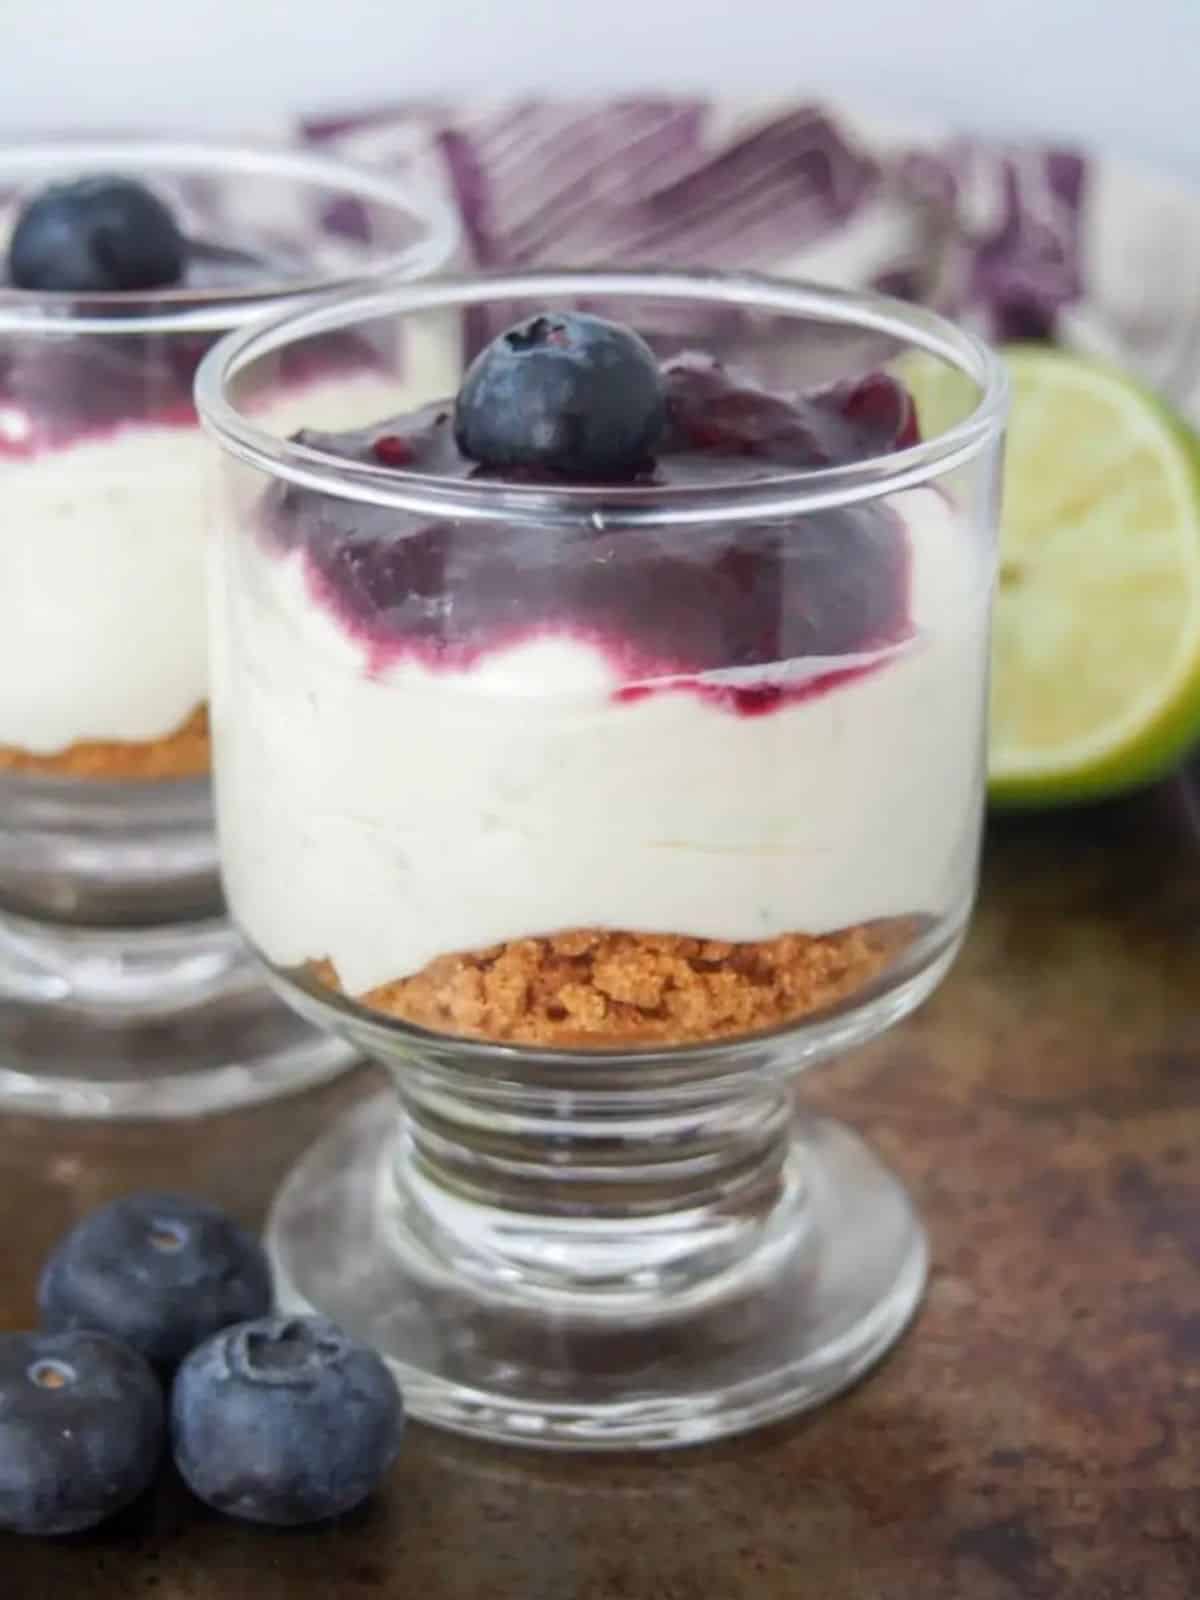 Lime Mascarpone Cheesecake topped with blueberries.